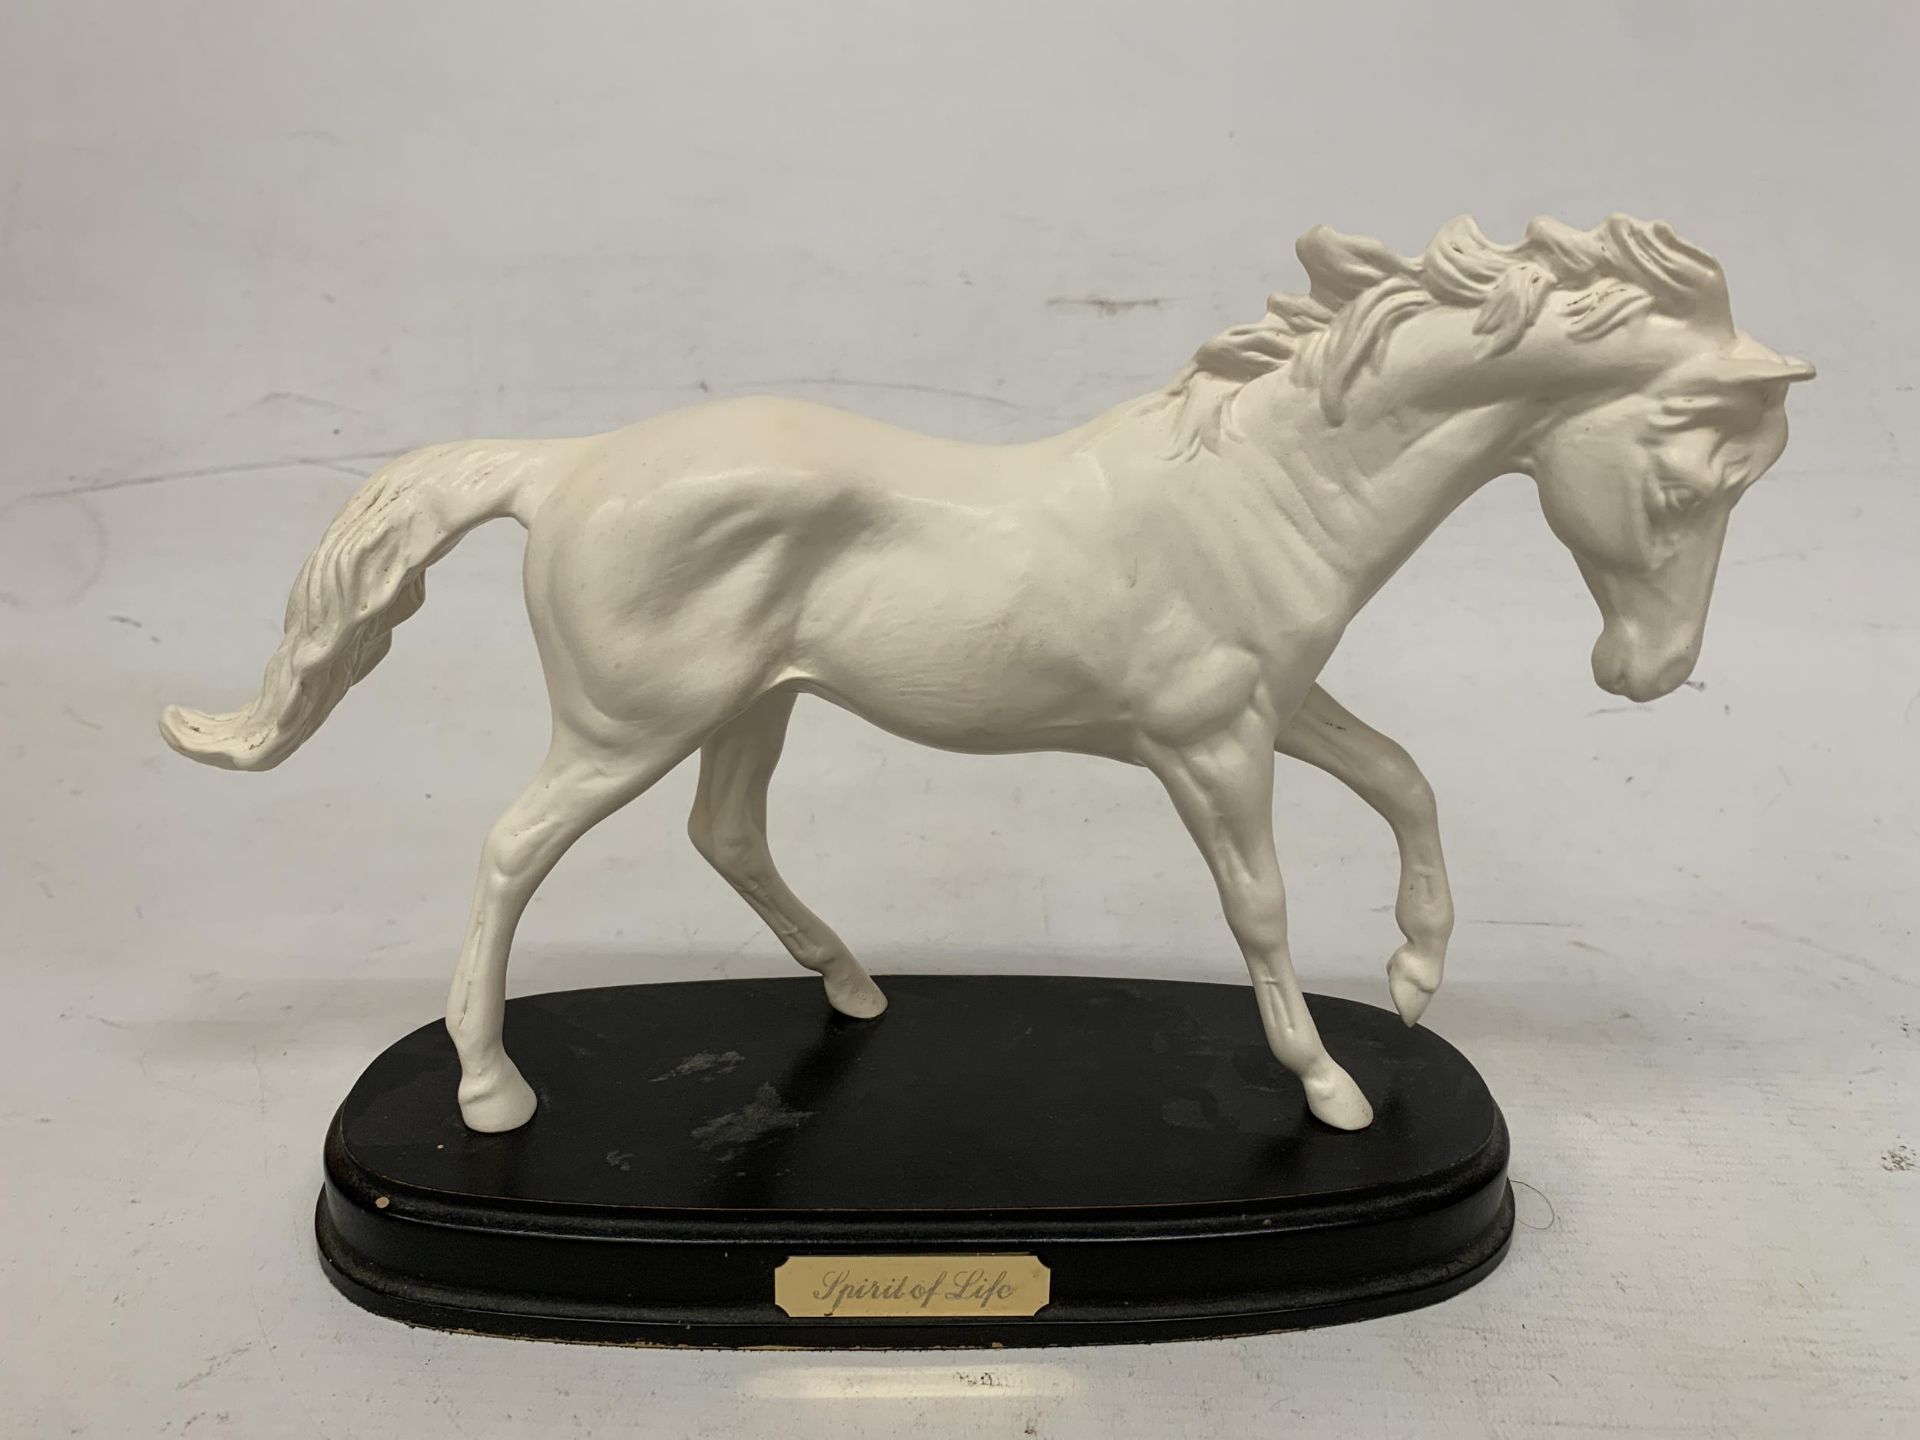 A ROYAL DOULTON "SPIRIT OF LIFE" FIGURE OF A HORSE ON WOODEN PLINTH